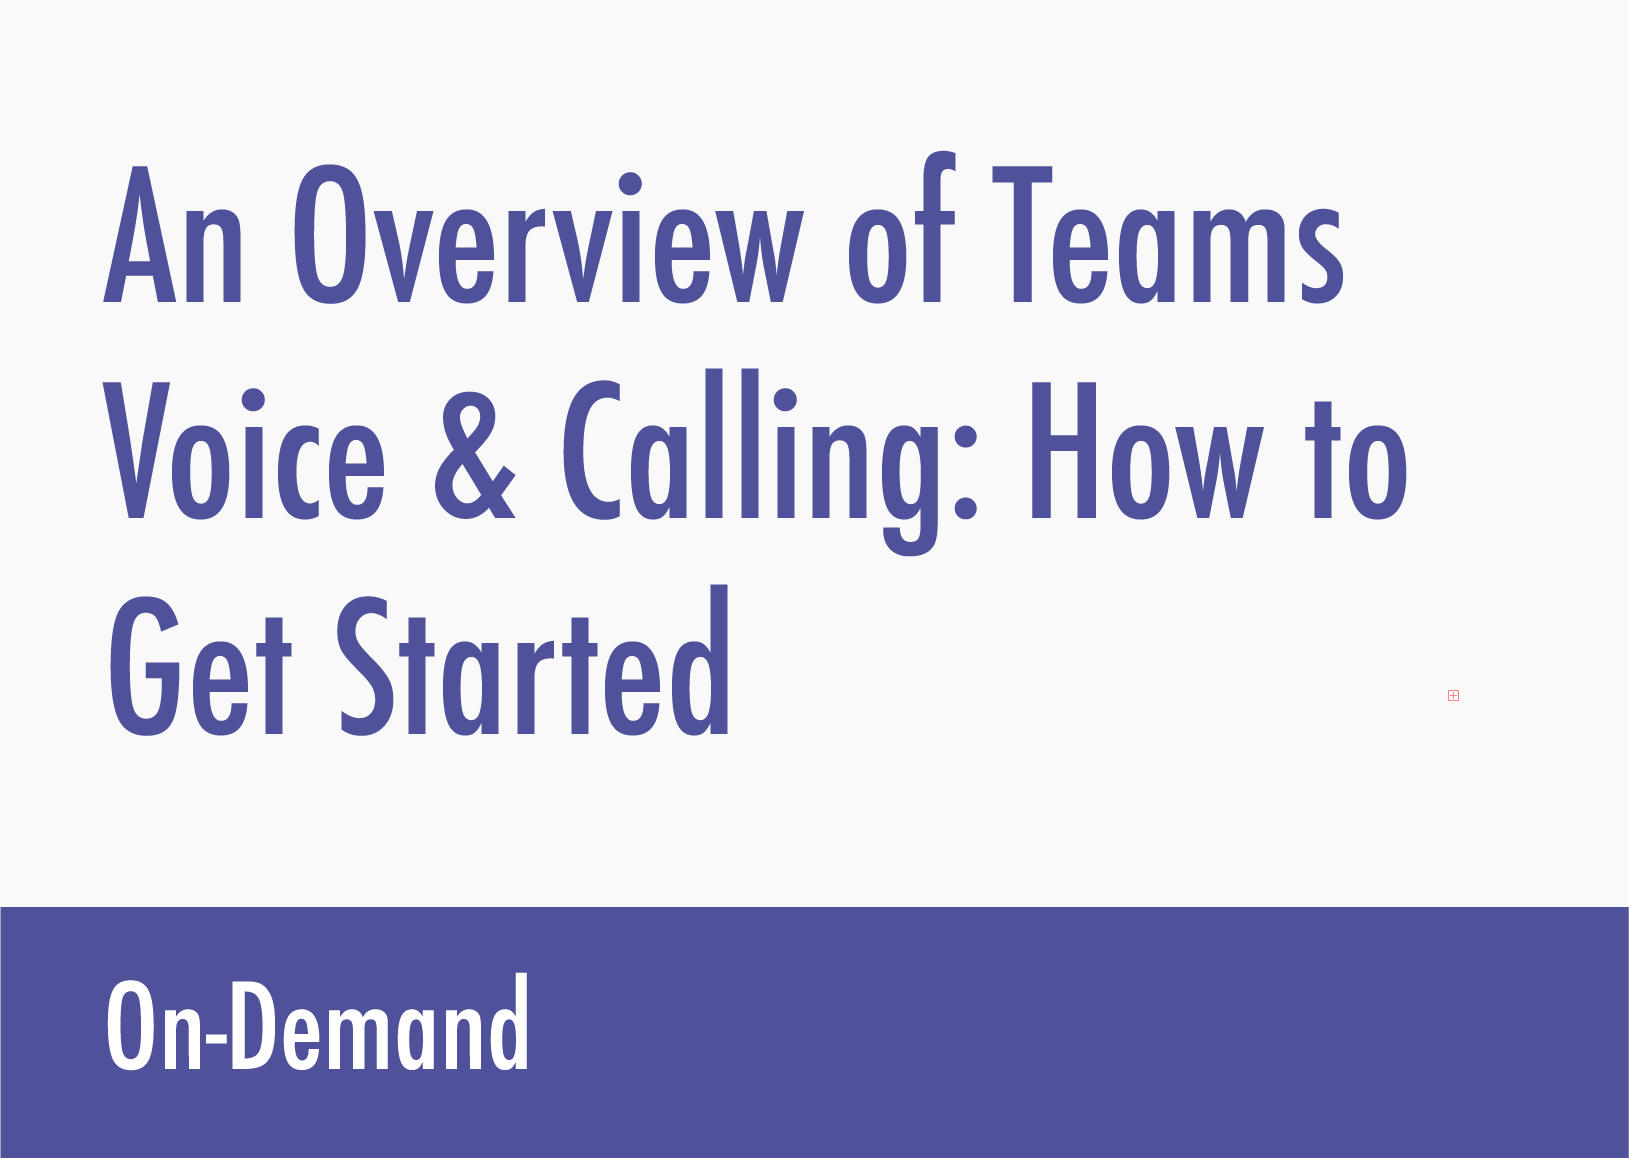 An Overview of Teams Voice and Calling - How to Get Started@4x